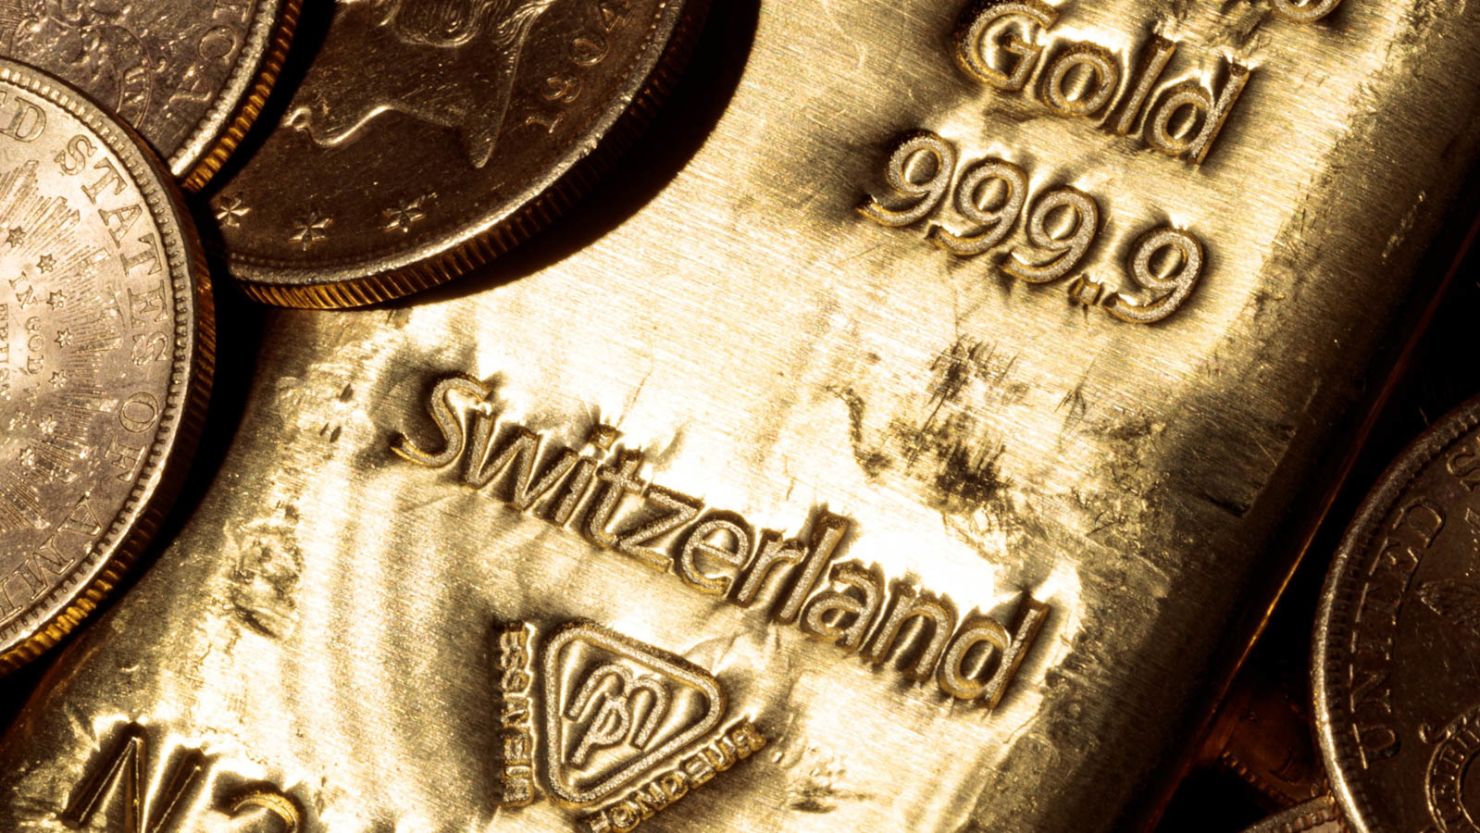 Swiss authorities say a parcel of gold was left behind on a passenger train.